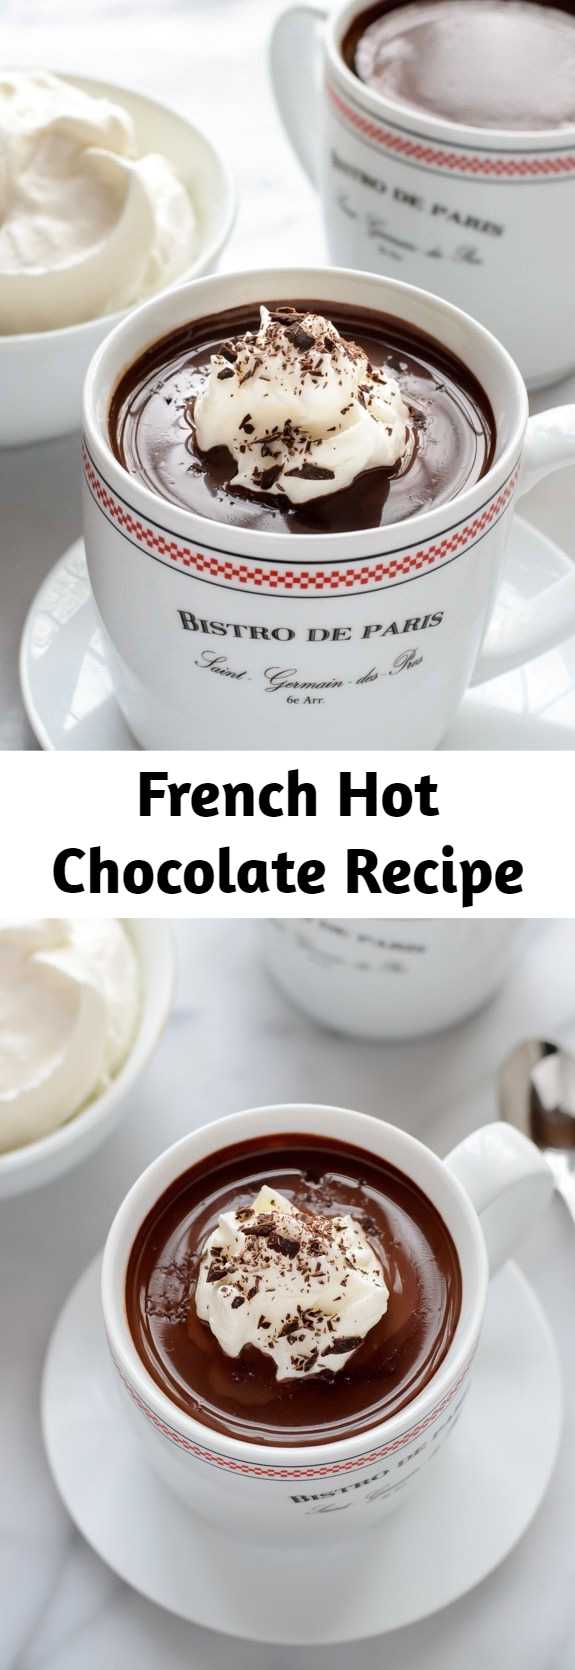 French Hot Chocolate Recipe - The most decadent dark hot chocolate recipe that tastes just like the French hot chocolate found in Paris cafés. Intense, rich, and absolute heaven for any chocolate lover. Recipe based off of the famous Café Angelina in Paris.